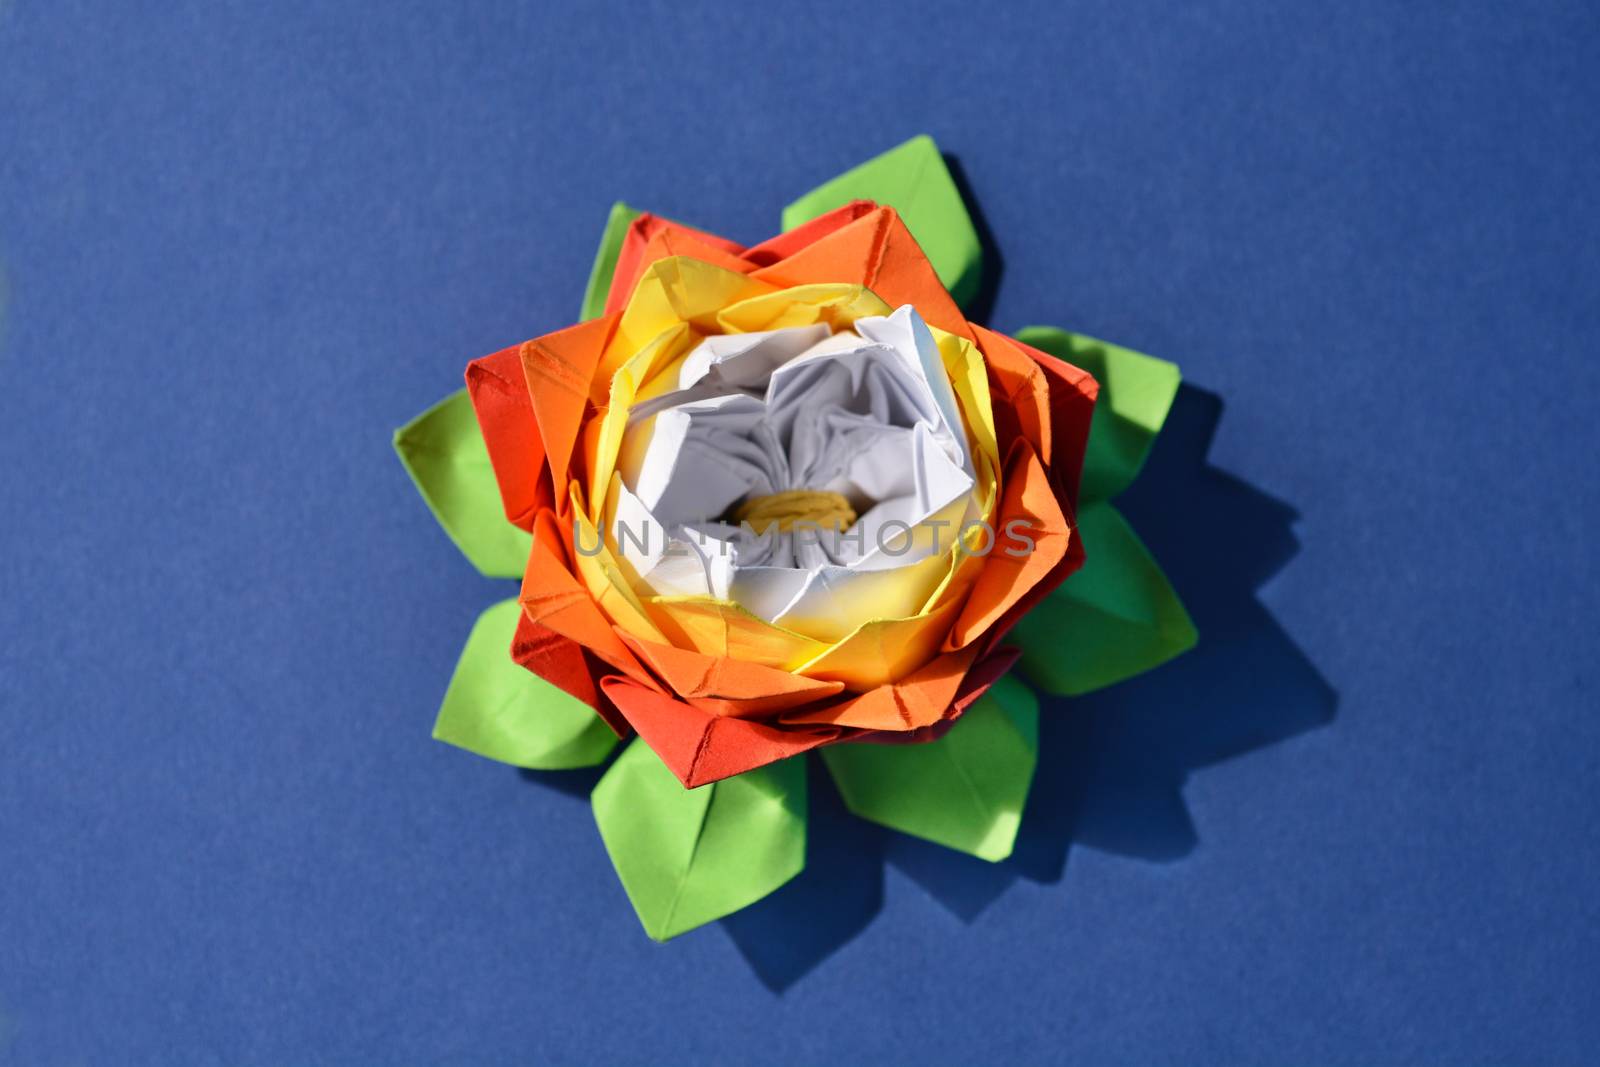 Origami paper flower by nahhan